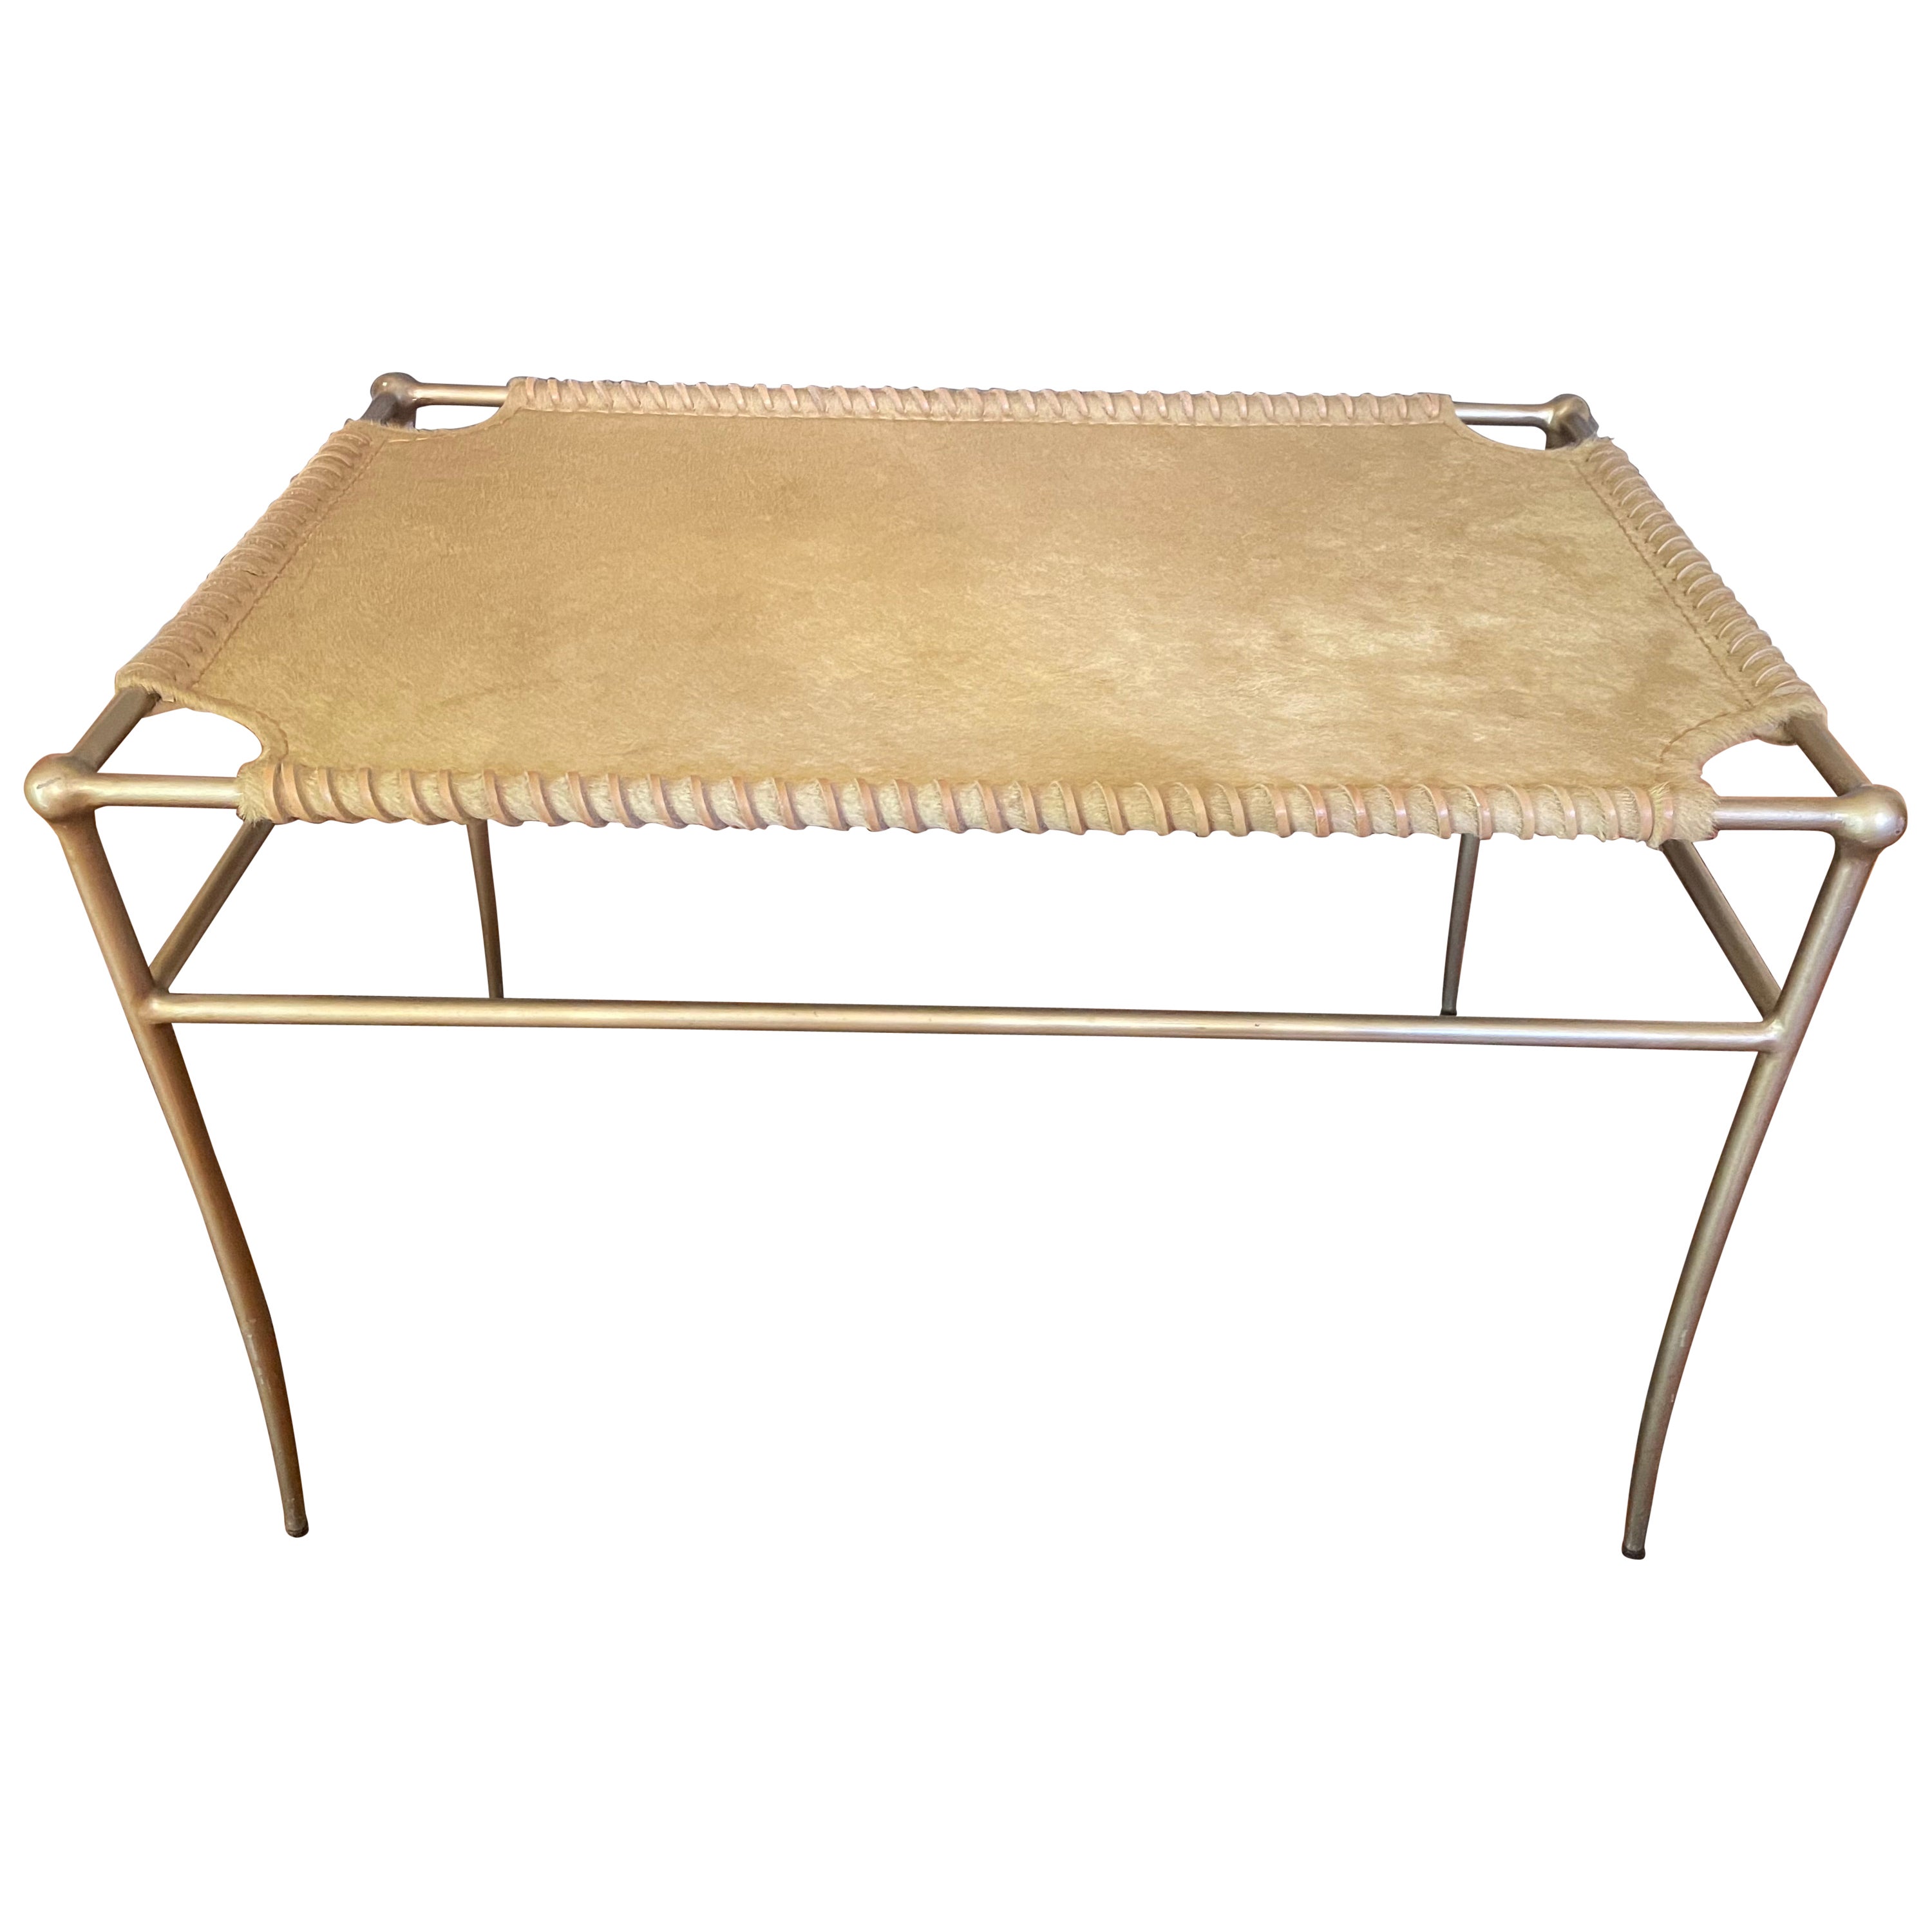 Umber-Colored Hide, Leather and Brass Bench For Sale